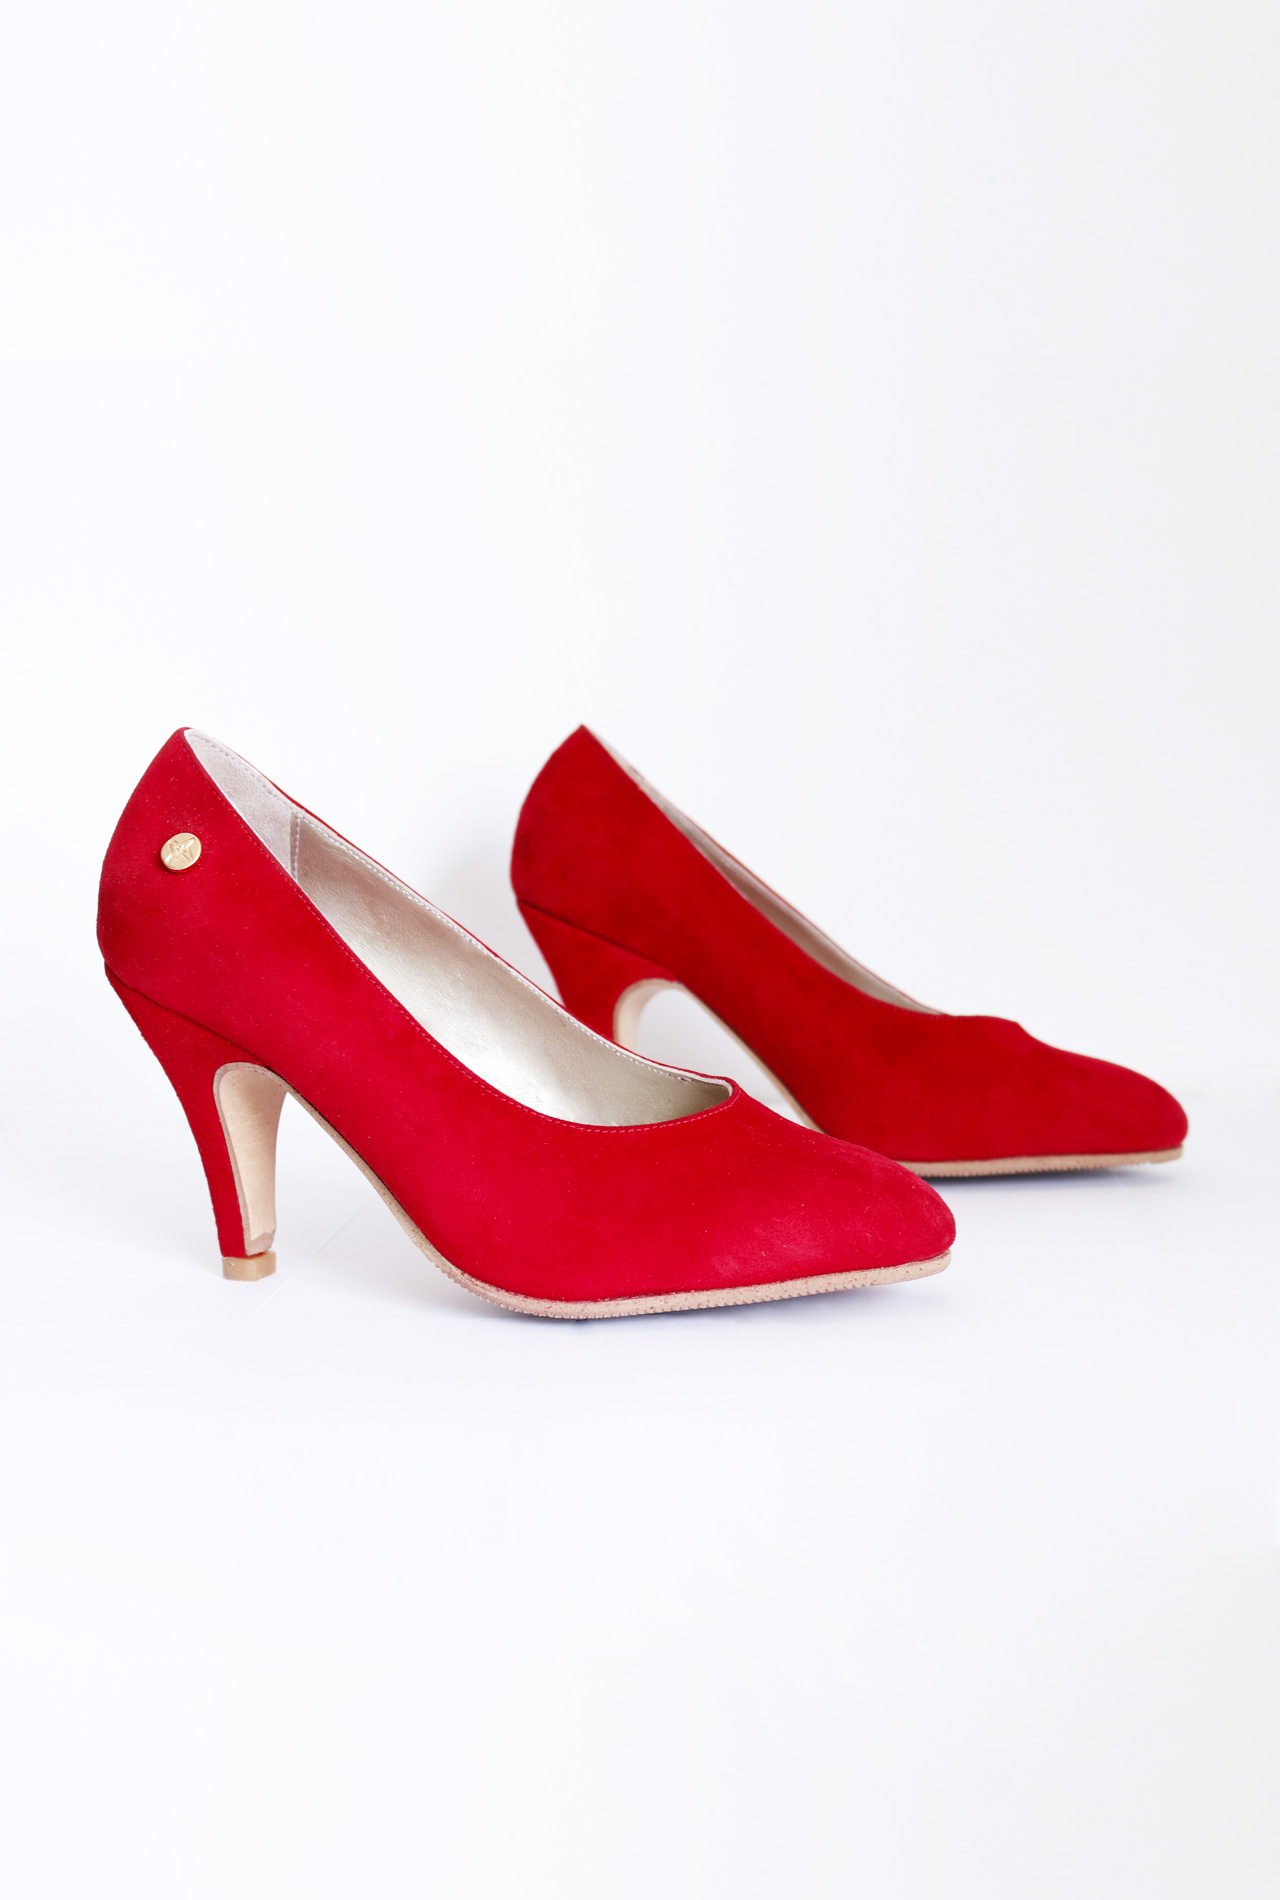 Red Pumps in Small Size | Shoes by Cristina Correia